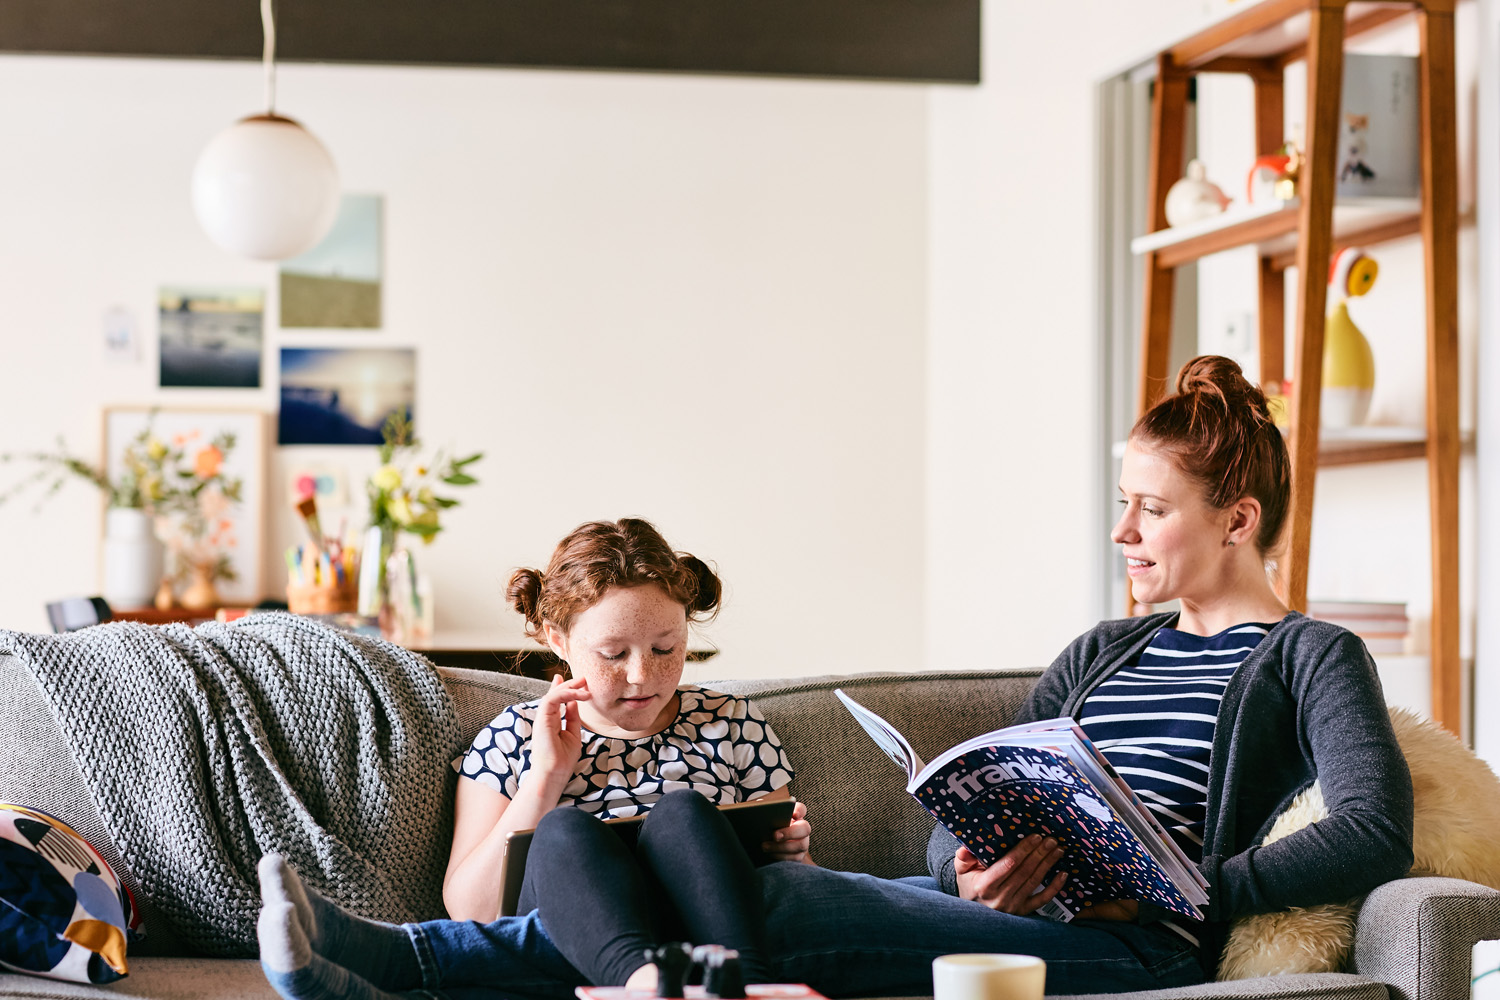 A mom and daughter read books on the couch in this lifestyle image by Leah Verwey